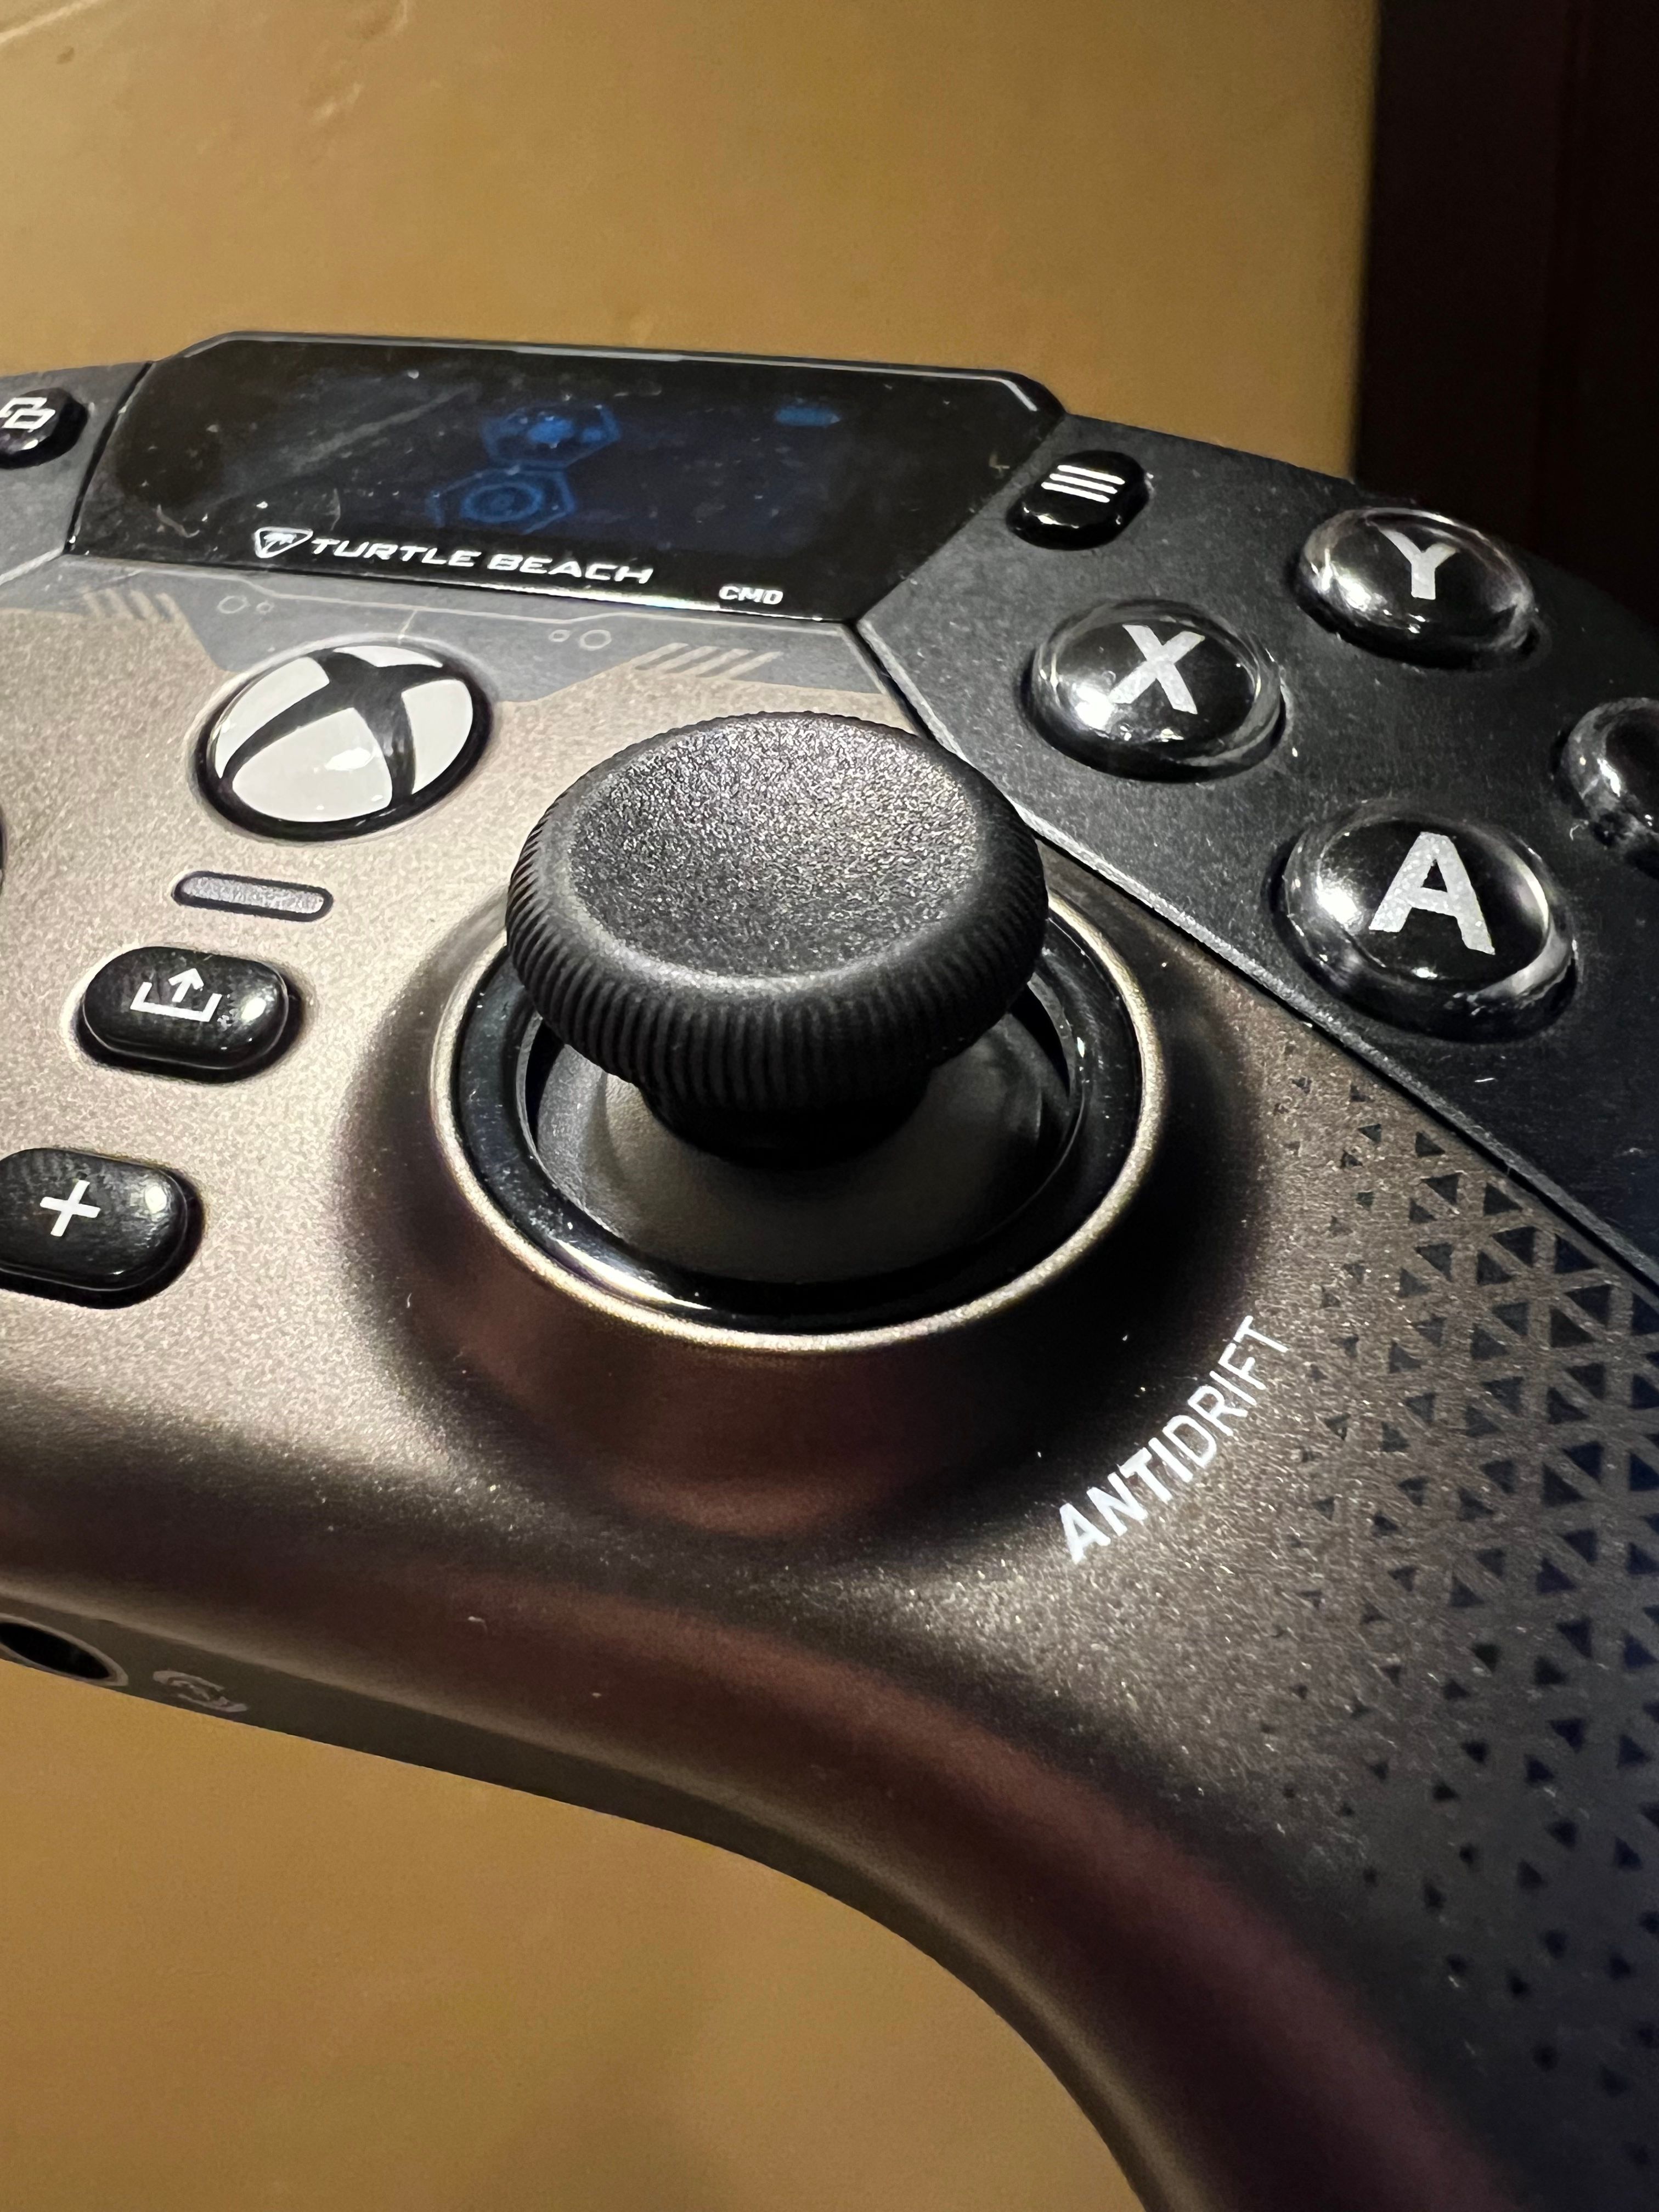 Turtle Beach's Stealth Ultra controller comes with a built-in display